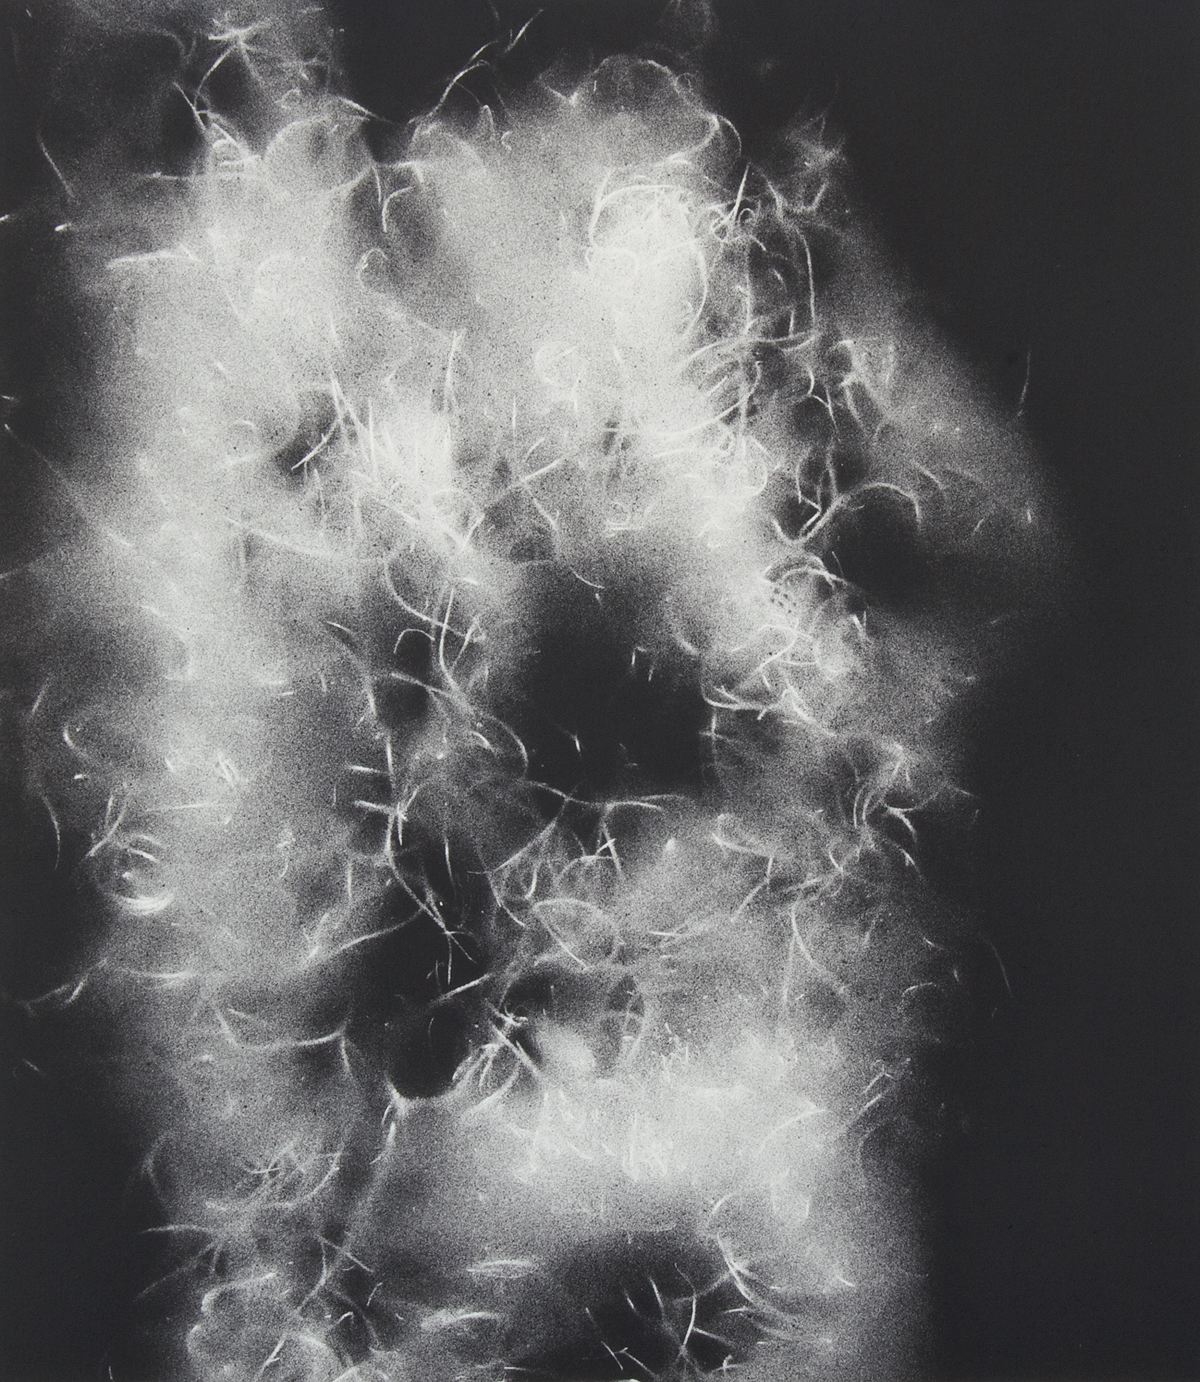   Spanish Moss 1217 , spray paint and wax pencil on paper, 16 x 12 inches, 2012 